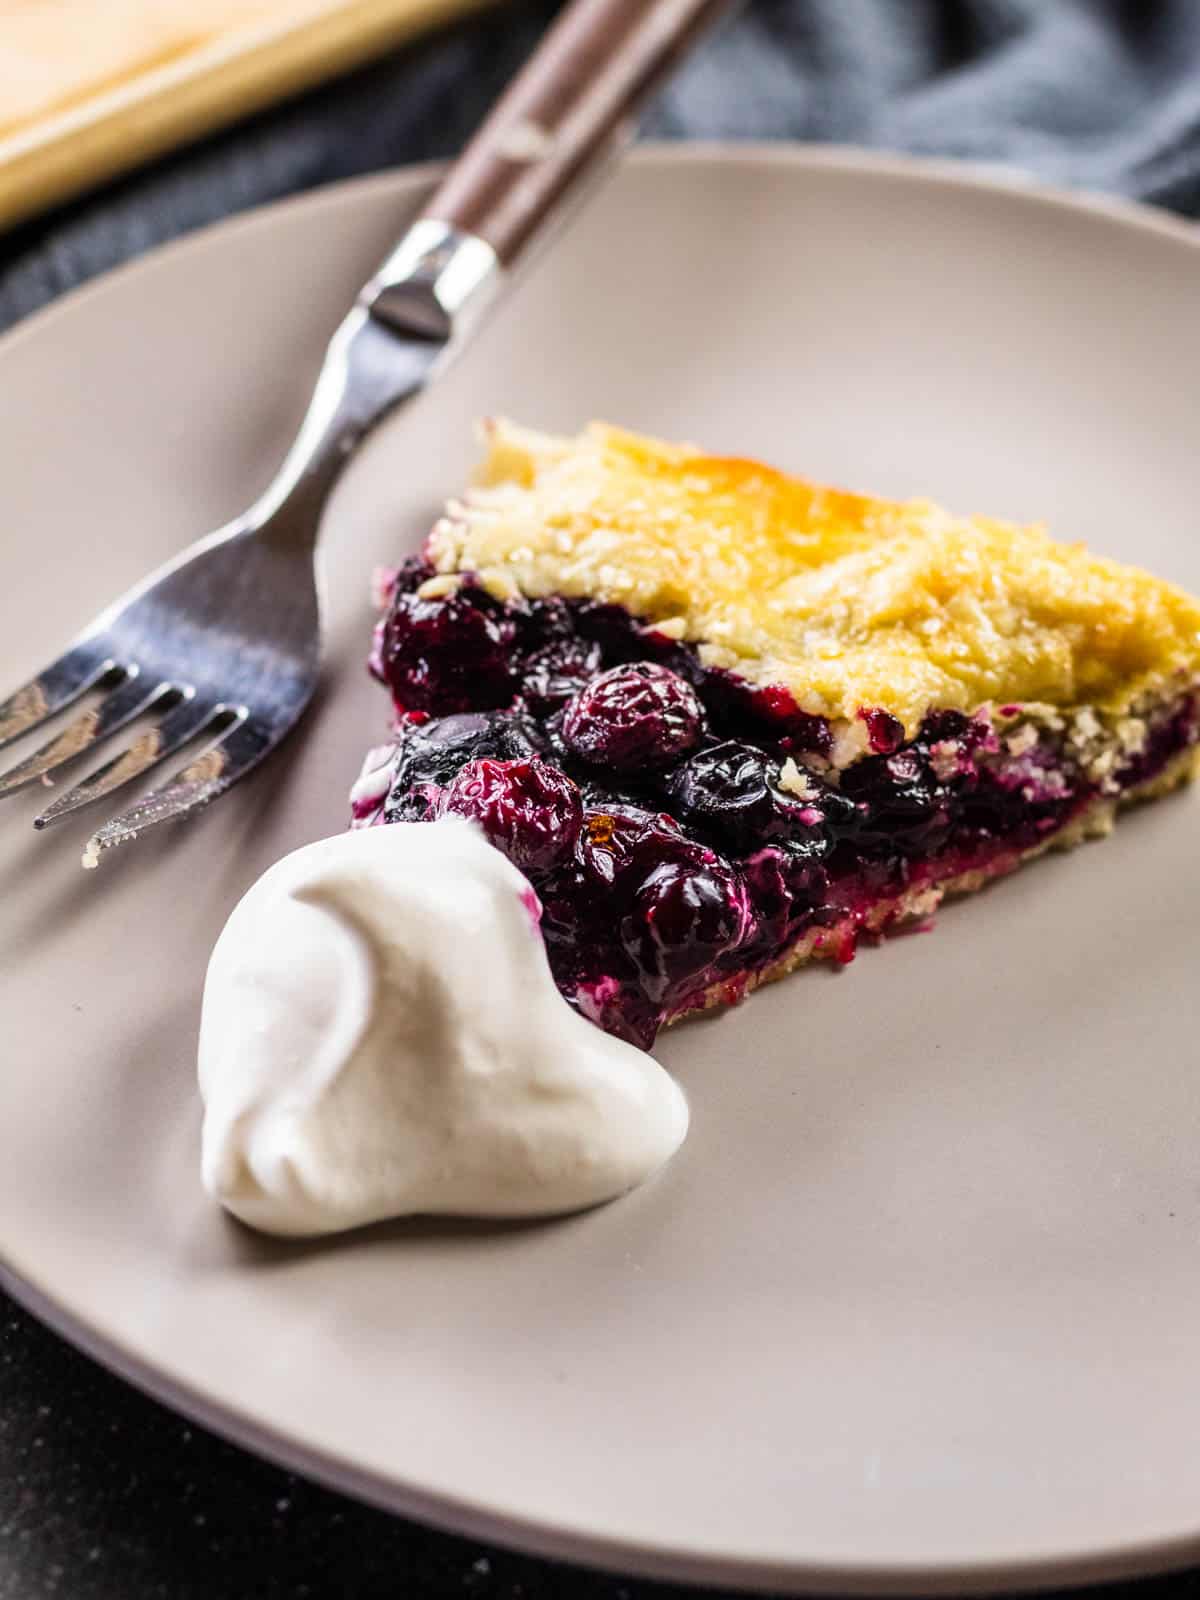 slice of blueberry crostata with a dollop of whipped cream on a gray plate with a fork.